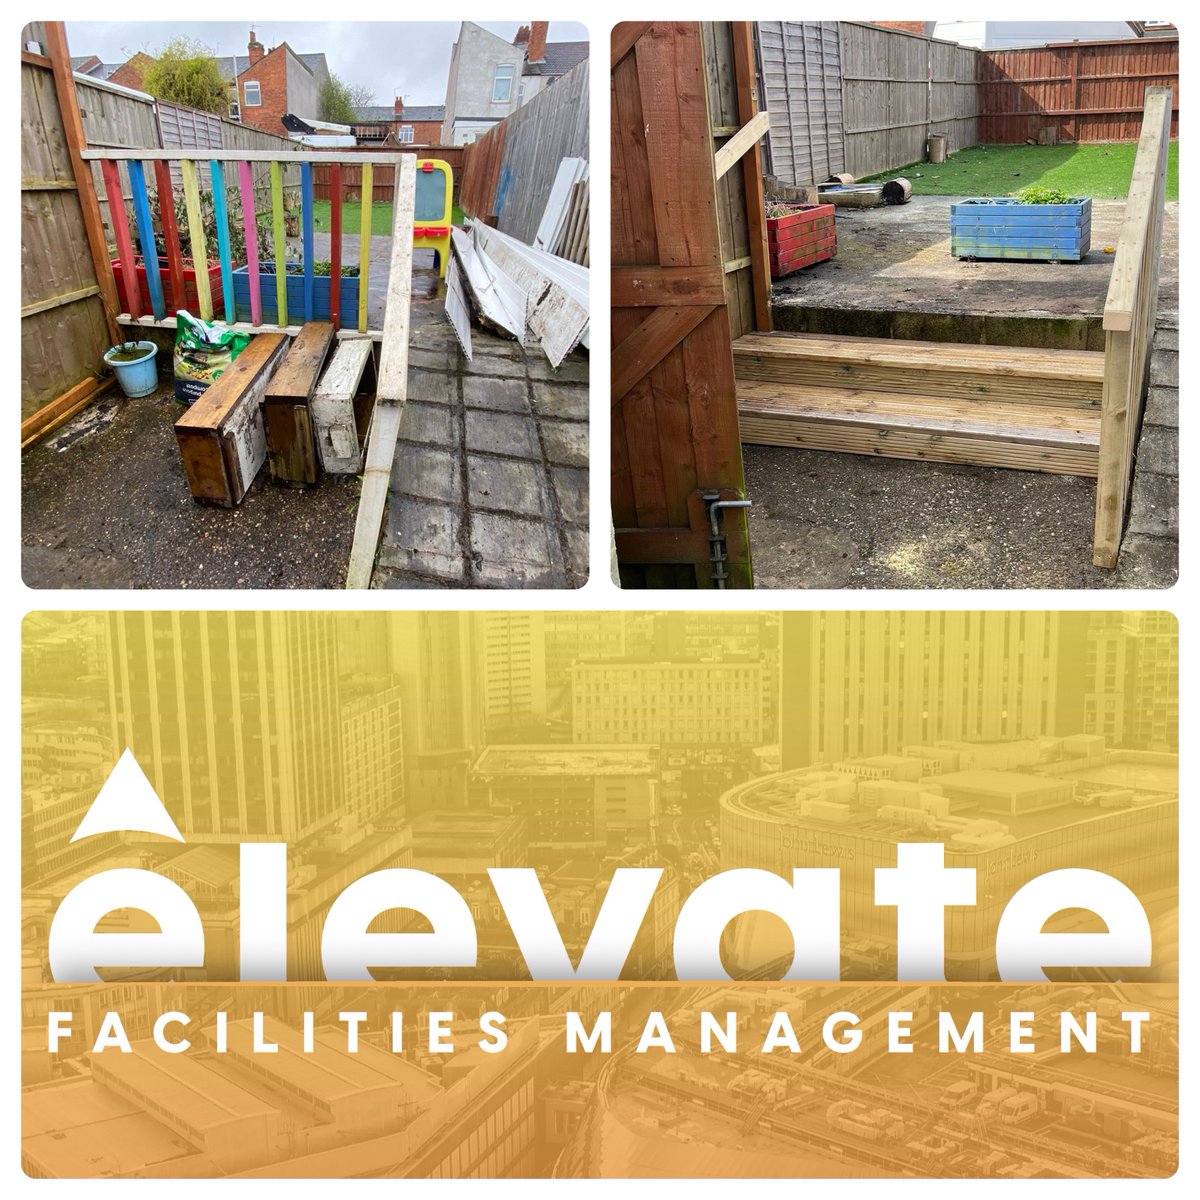 🌿 Transforming Access at a New Children’s Nursery 🌿

📞 0330 128 9898
📧 info@elevatefm.co.uk
💻 elevatefm.co.uk

#ElevateFM #ChildcareSector #Education #SafeAccess #QualityService